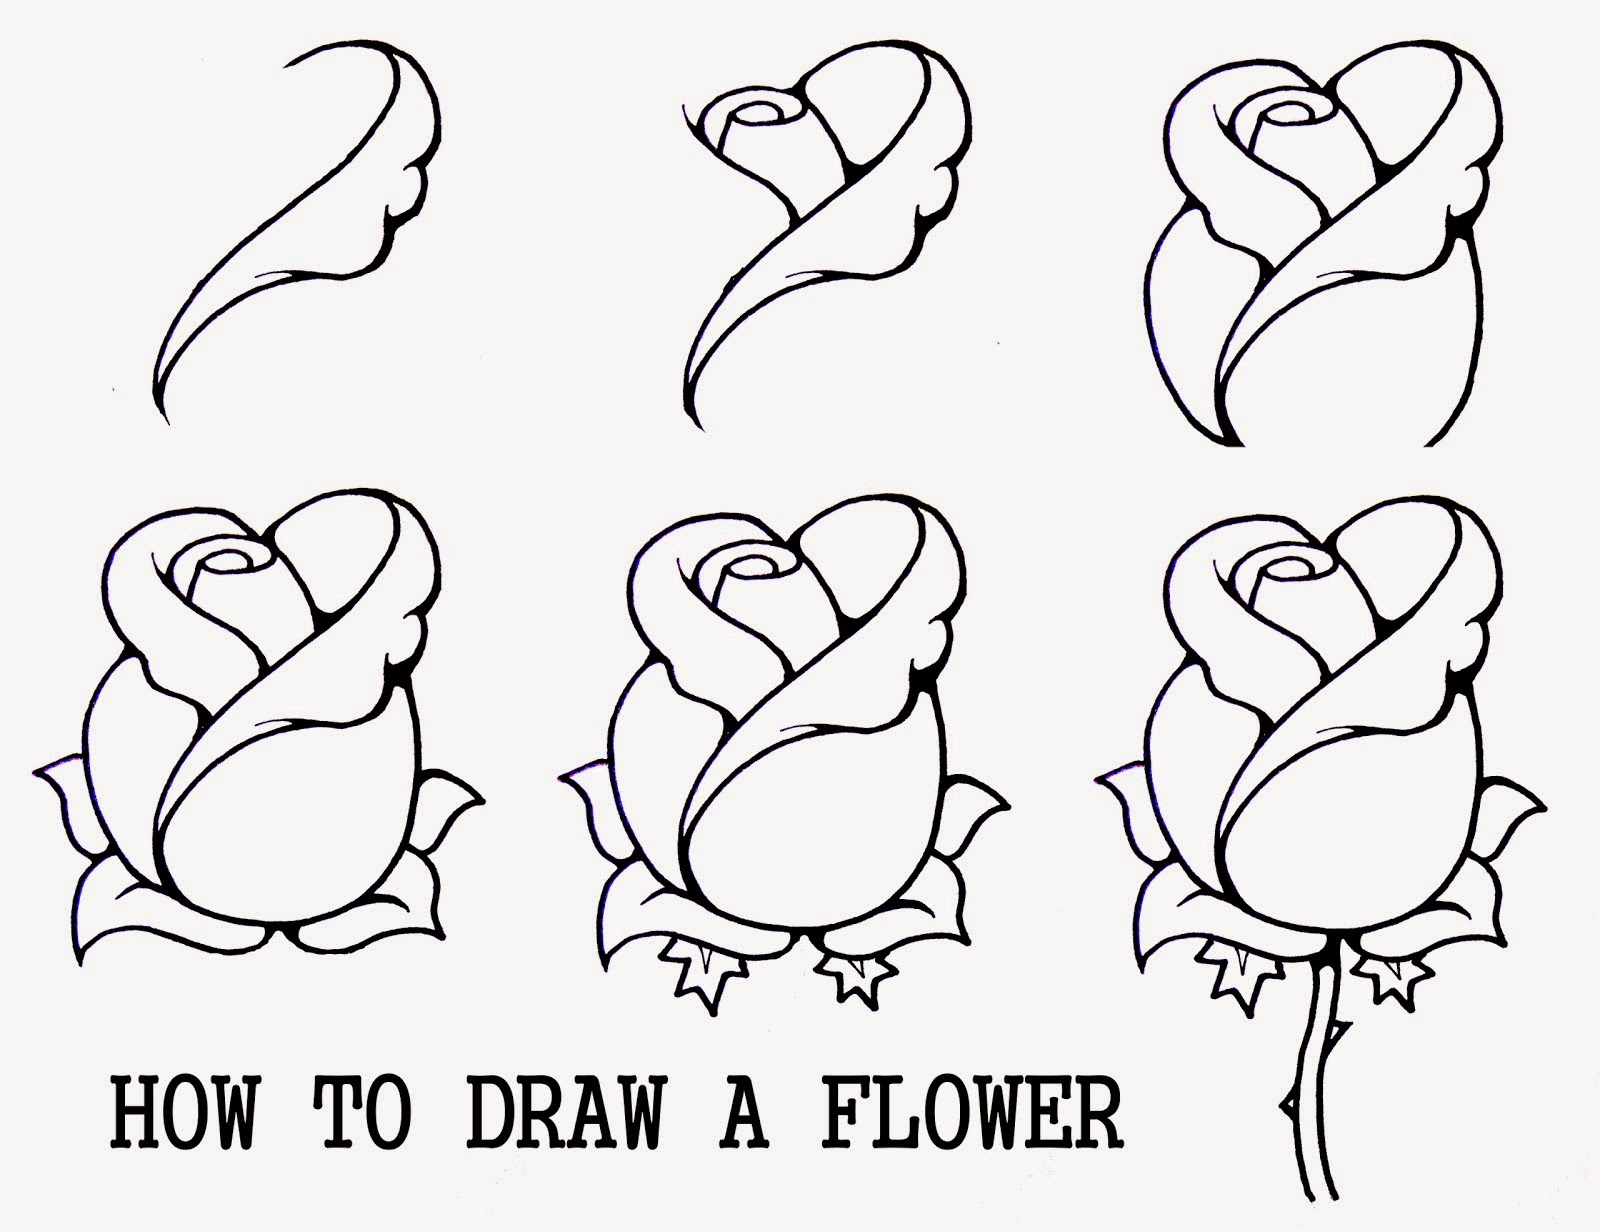 How to draw a flower easy step by step - Learn To Draw And Paint